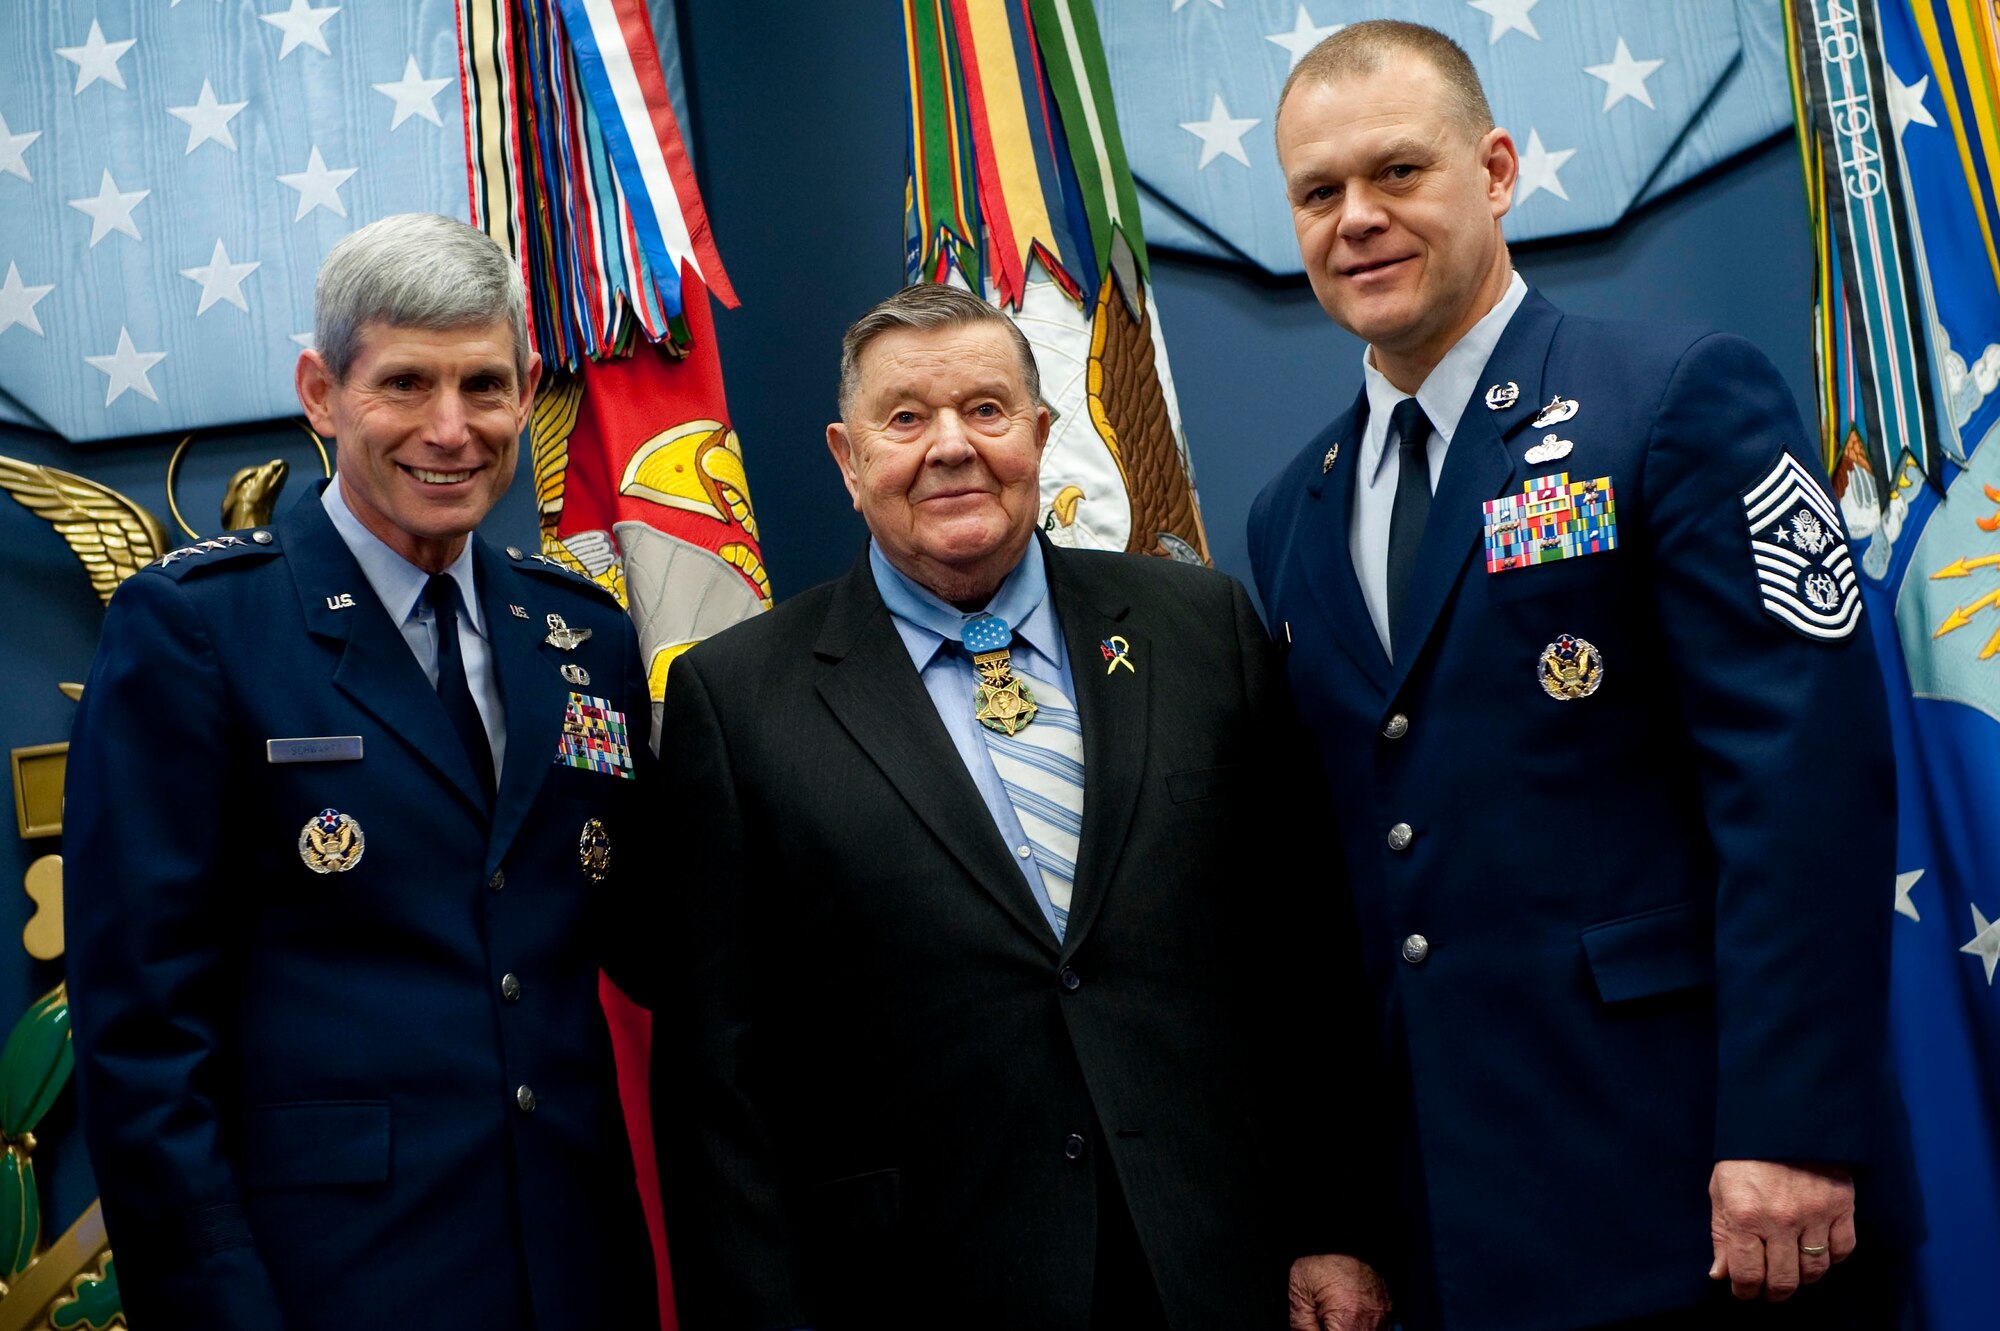 Air Force Chief of Staff Gen. Norton Schwartz, Medal of Honor recipient retired Col. Joe Jackson and Chief Master Sgt. of the Air Force James A. Roy visit March 25, 2011, prior to a ceremony honoring the 150th anniversary of the Medal of Honor in the Hall of Heroes at the Pentagon in Washington, D.C. (Department of Defense photo/Petty Officer 1st Class Chad J. McNeeley)